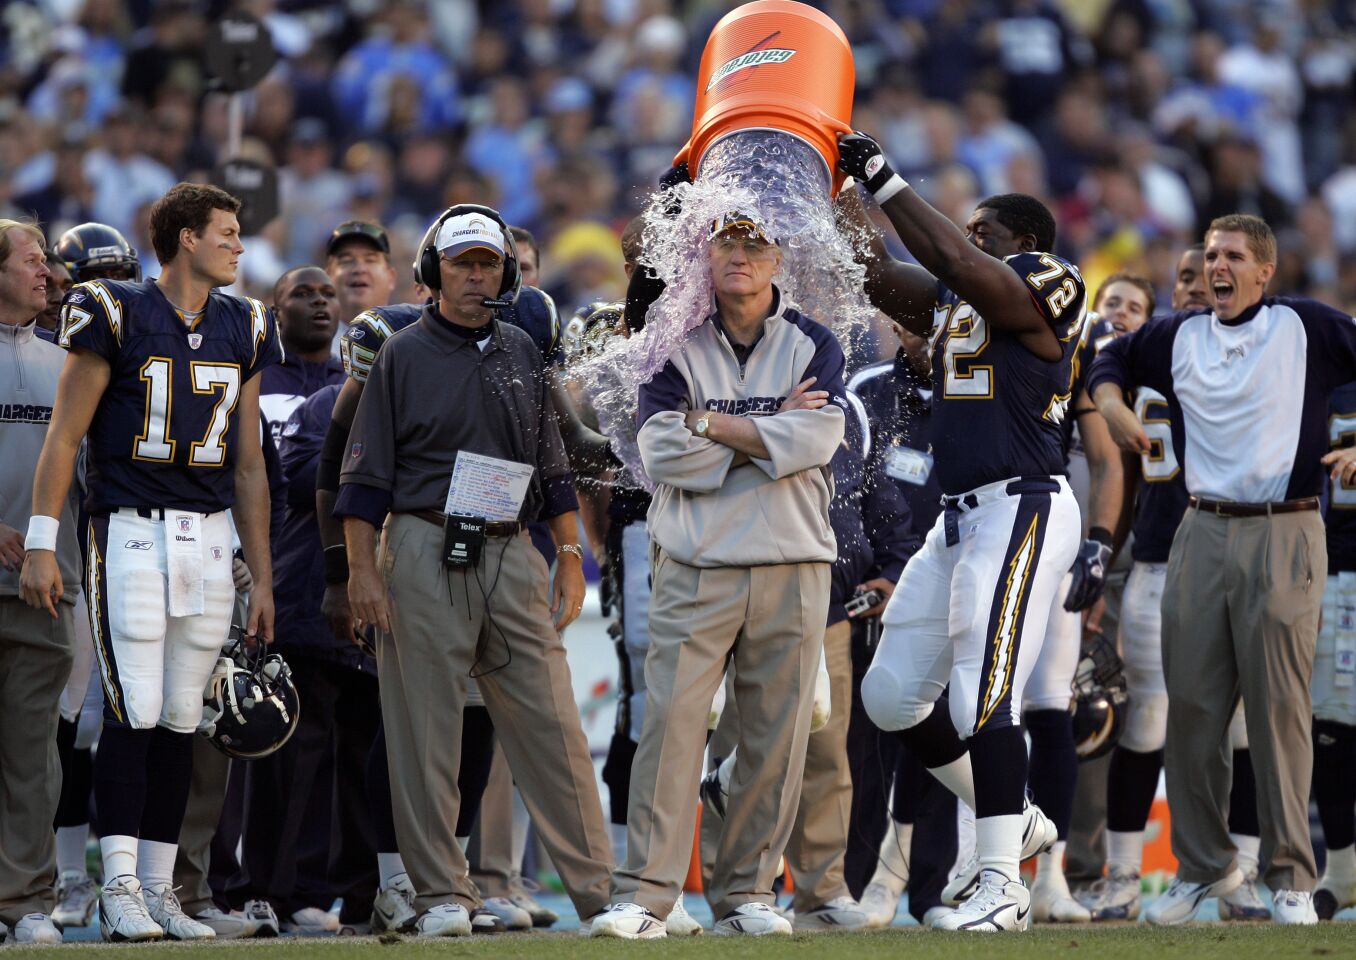 Chargers Philip Rivers, left, looks on as coach Marty Schottenheimer is dunked with water after his 200th NFL win against the Arizona Cardinals on Dec. 31, 2006, at Qualcomm Stadium.